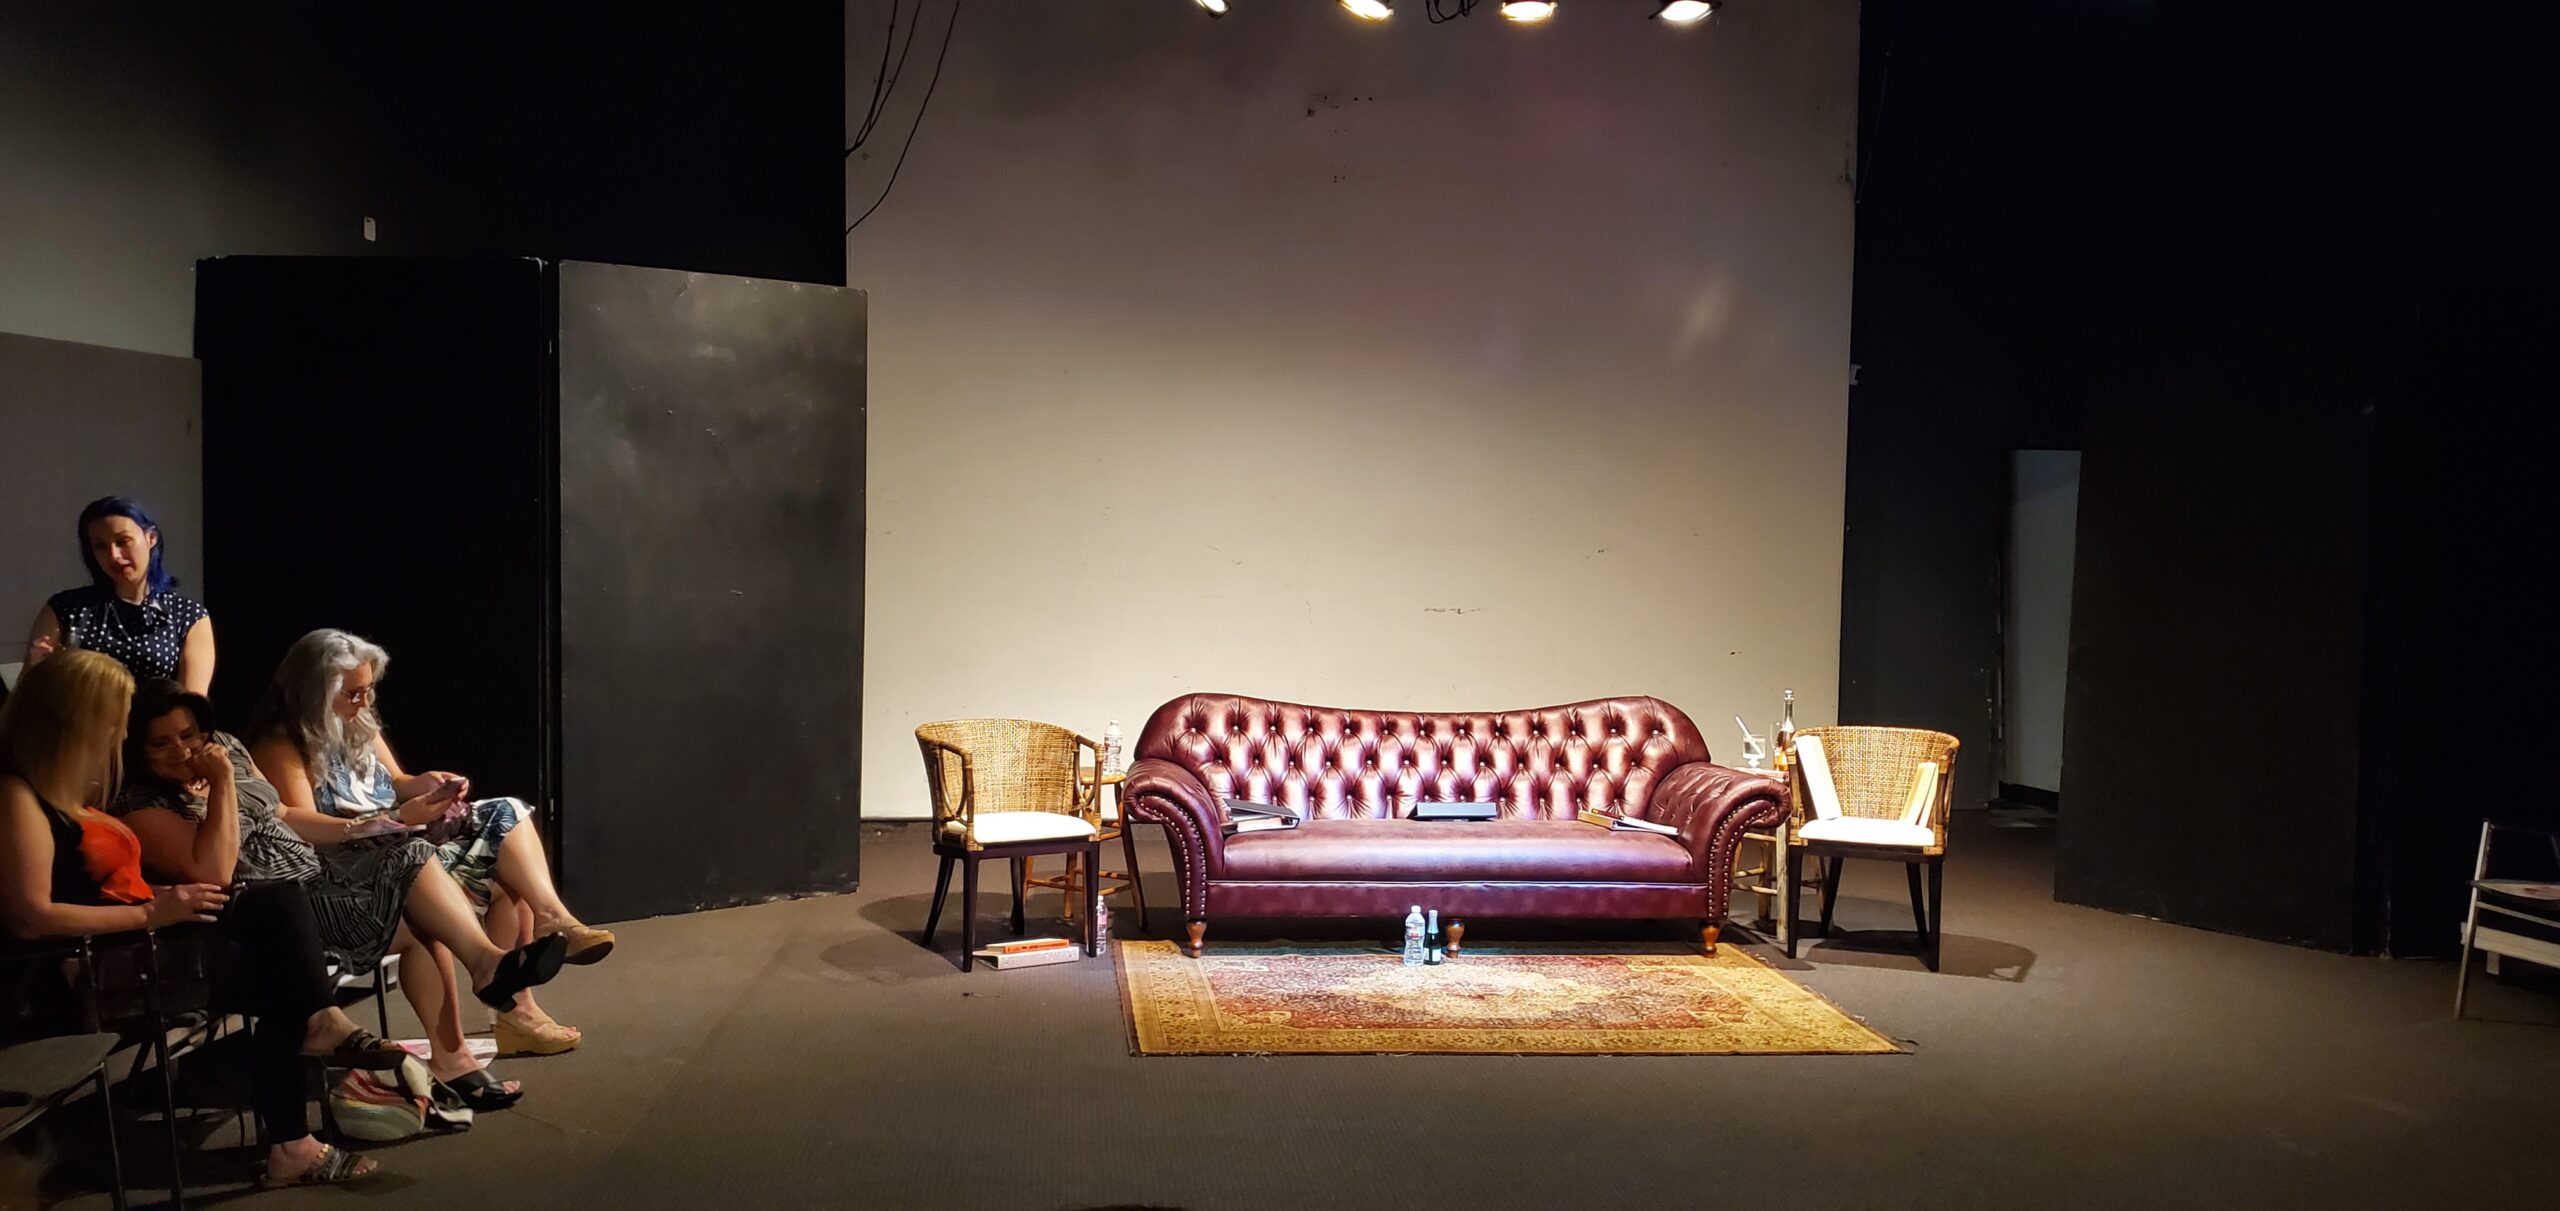 An open stage, with an empty red couch